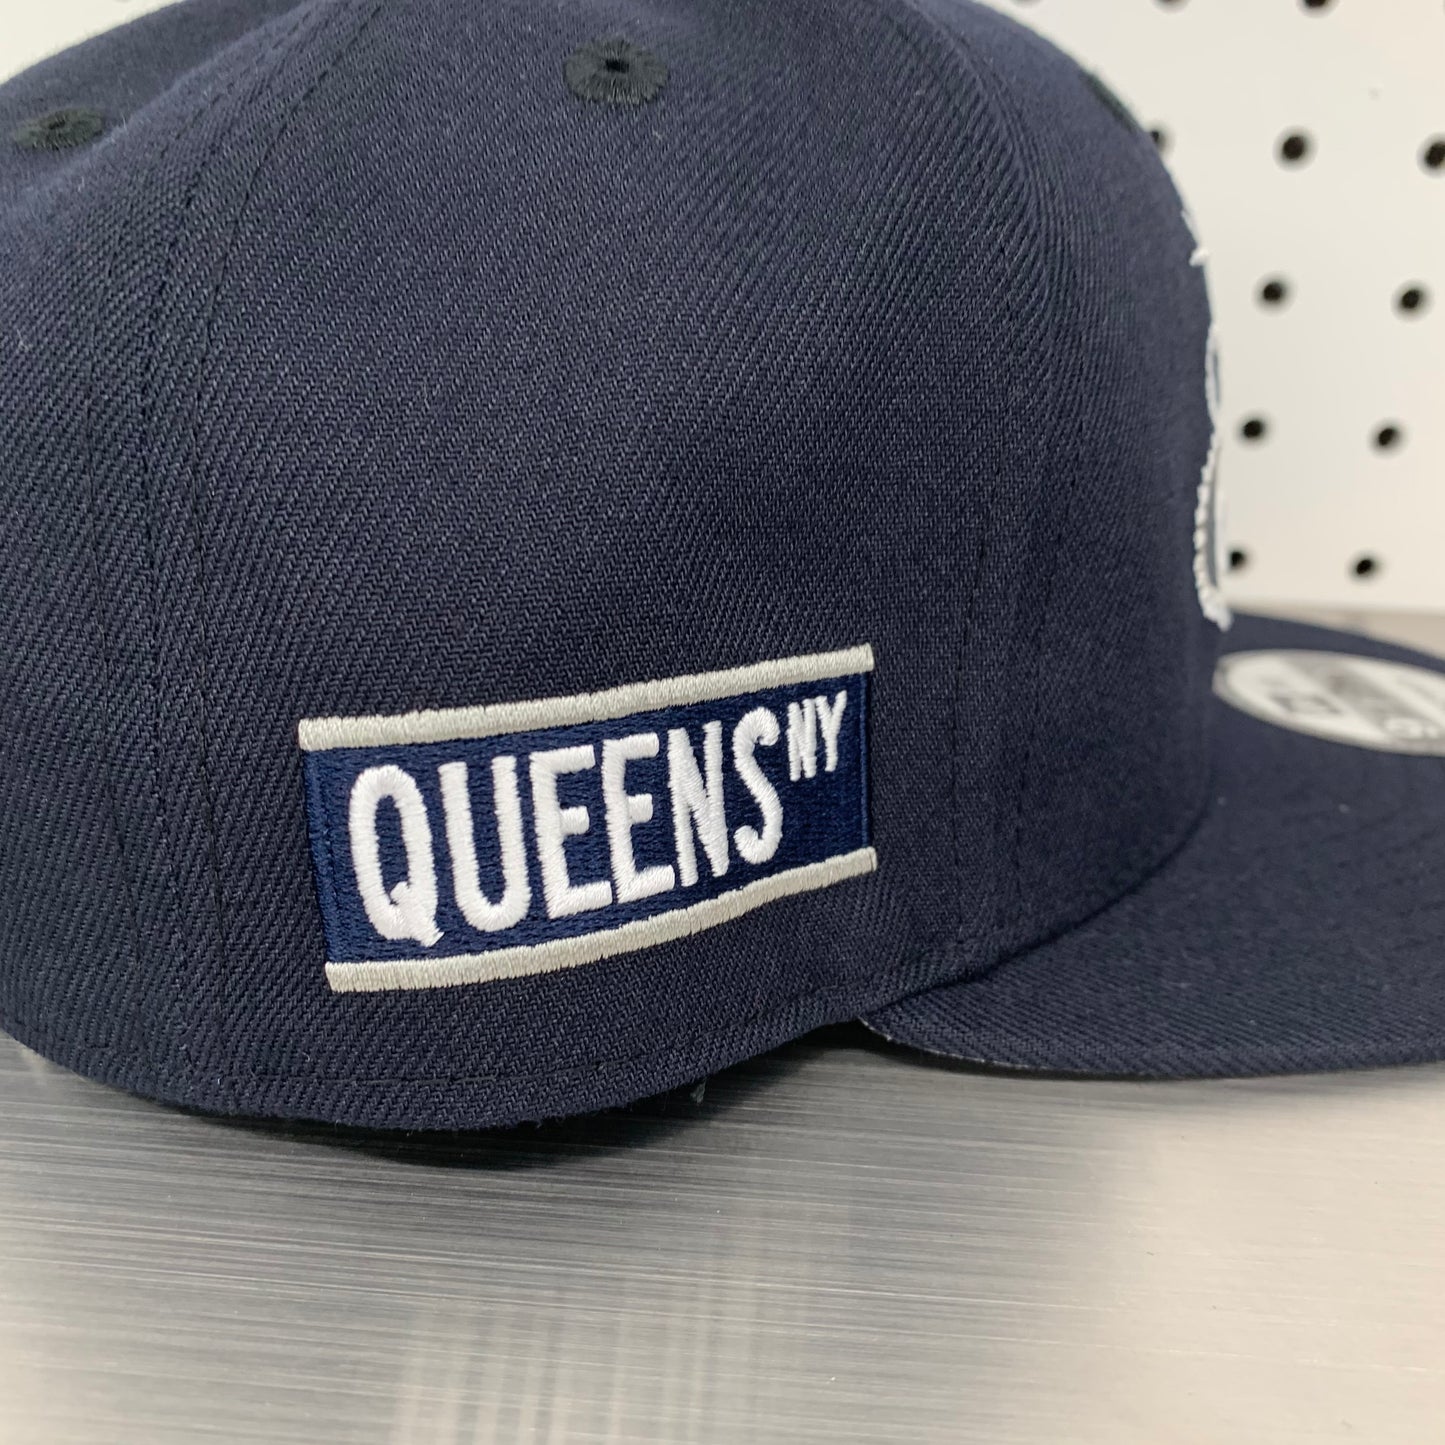 Welcome to Fabulous Queens New Era 9FIFTY SnapBack Cap